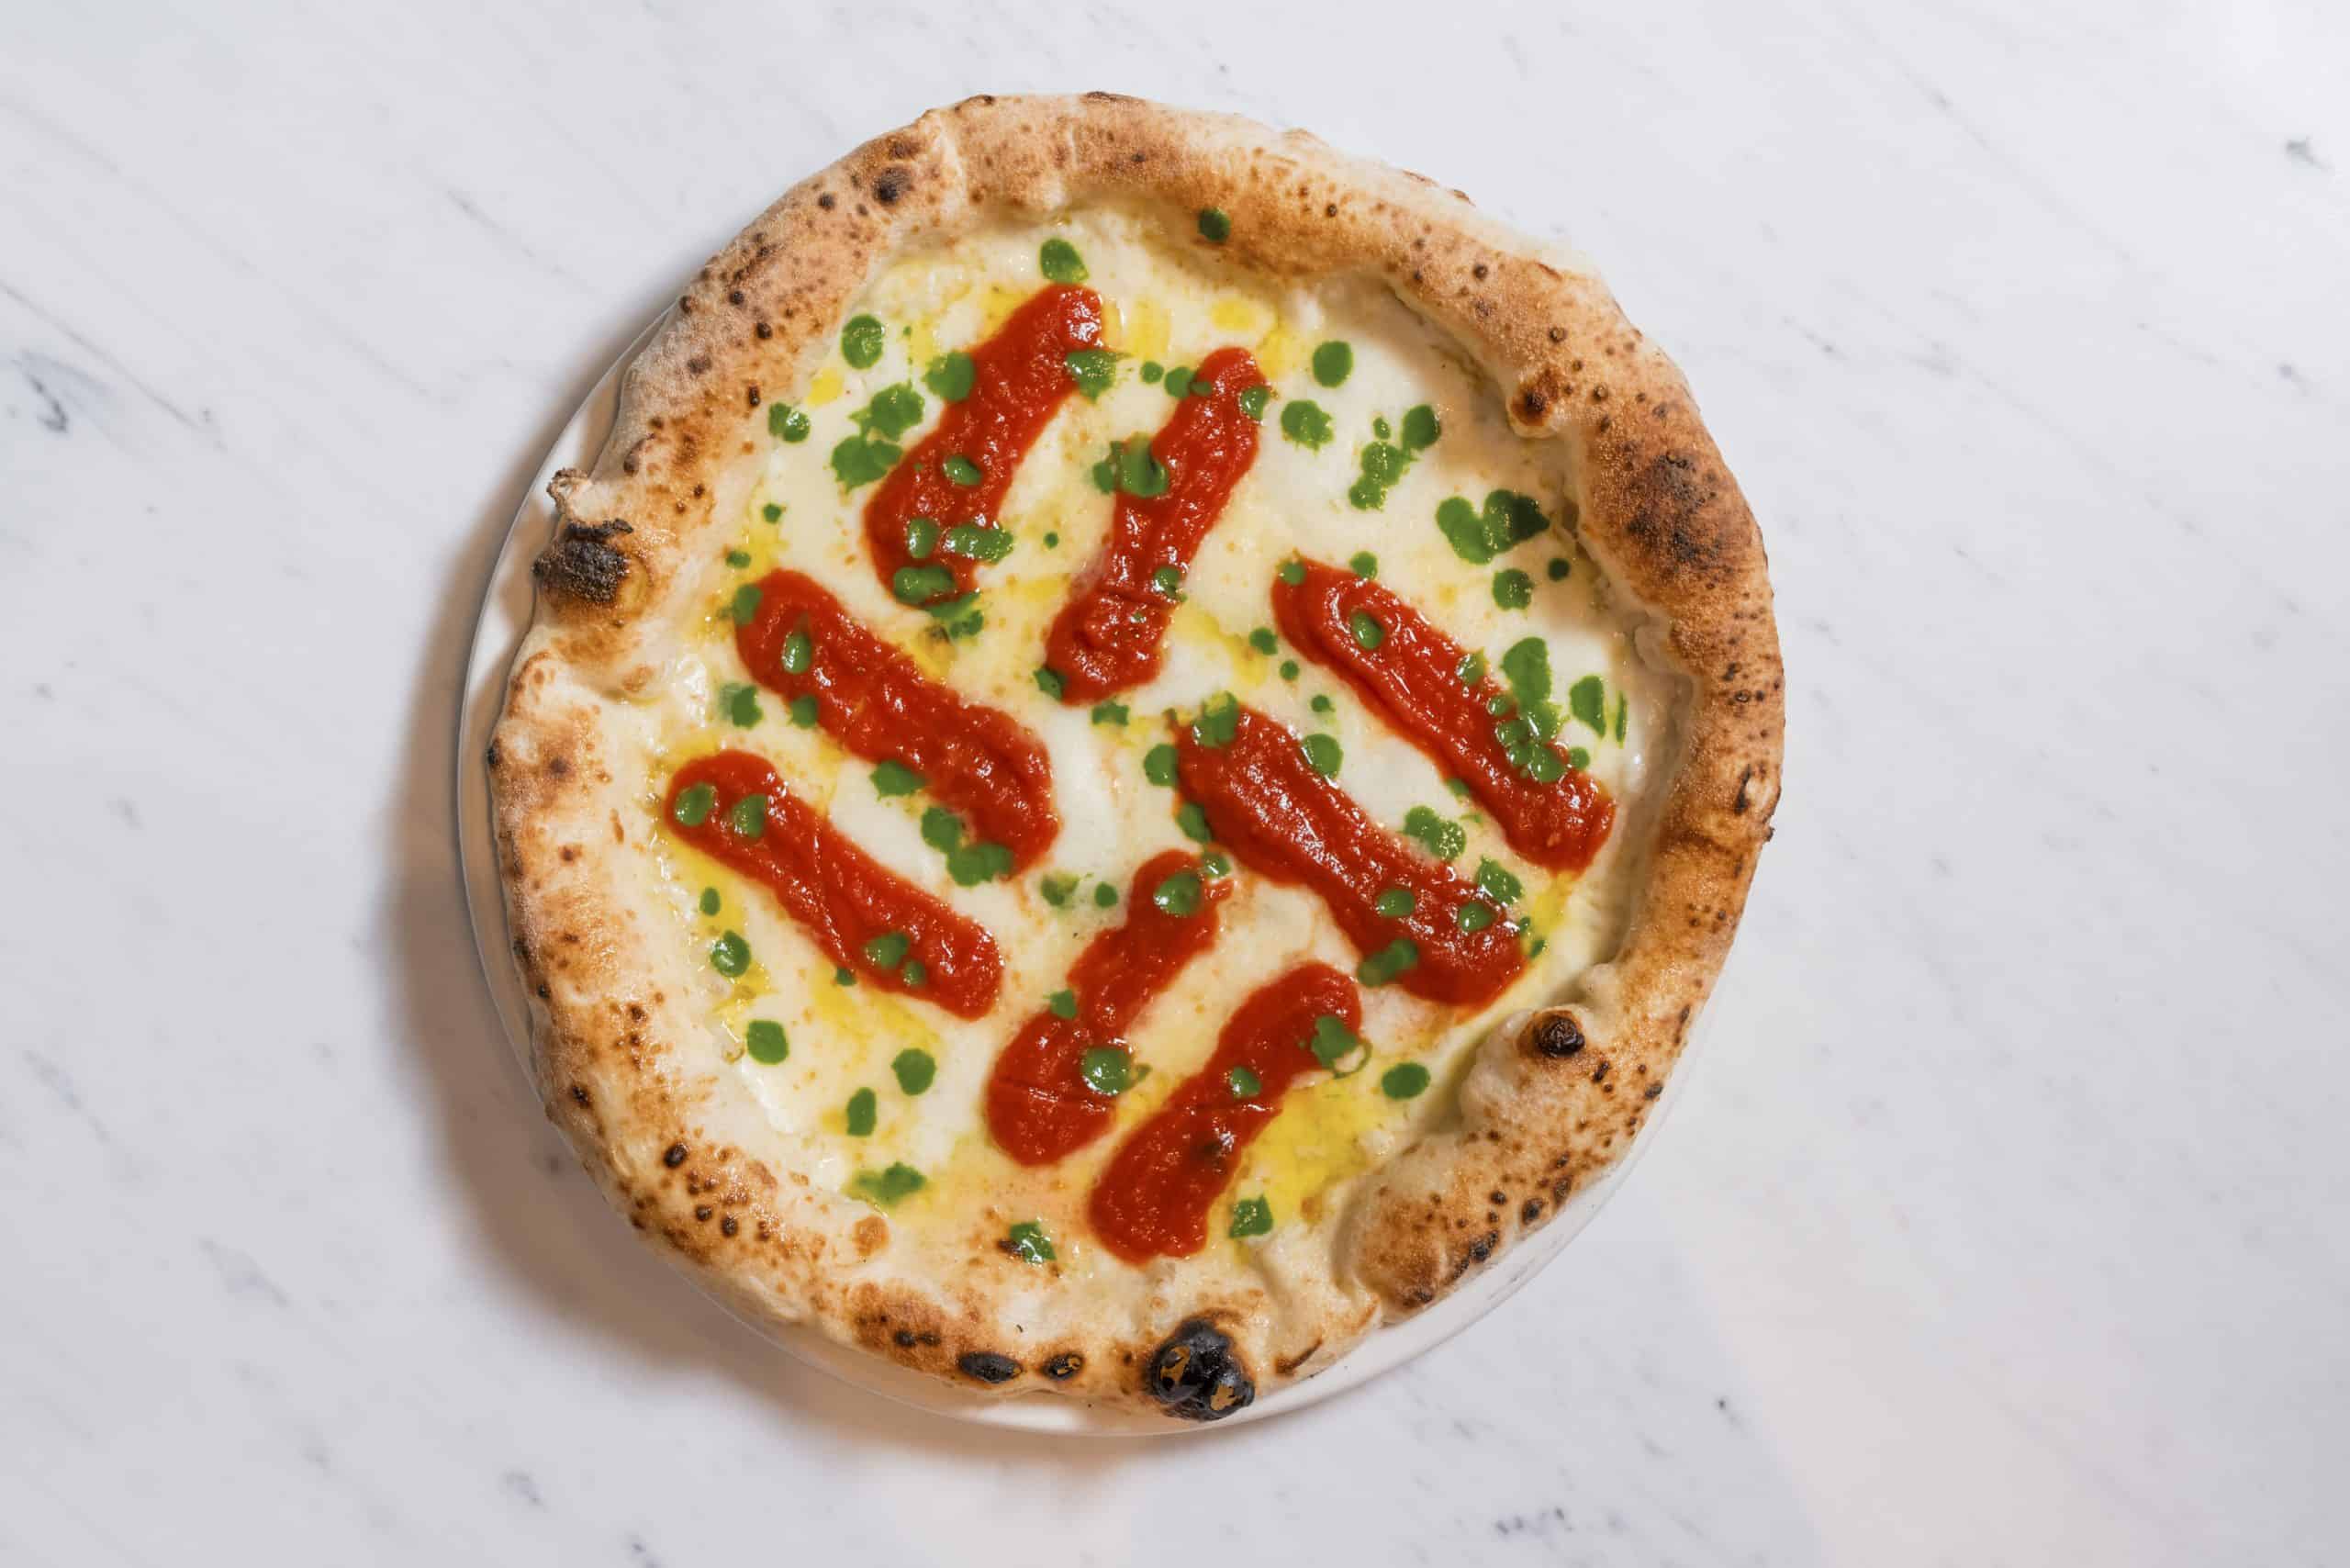 World’s best pizza – the ‘Mistaken Margherita’ – comes to London